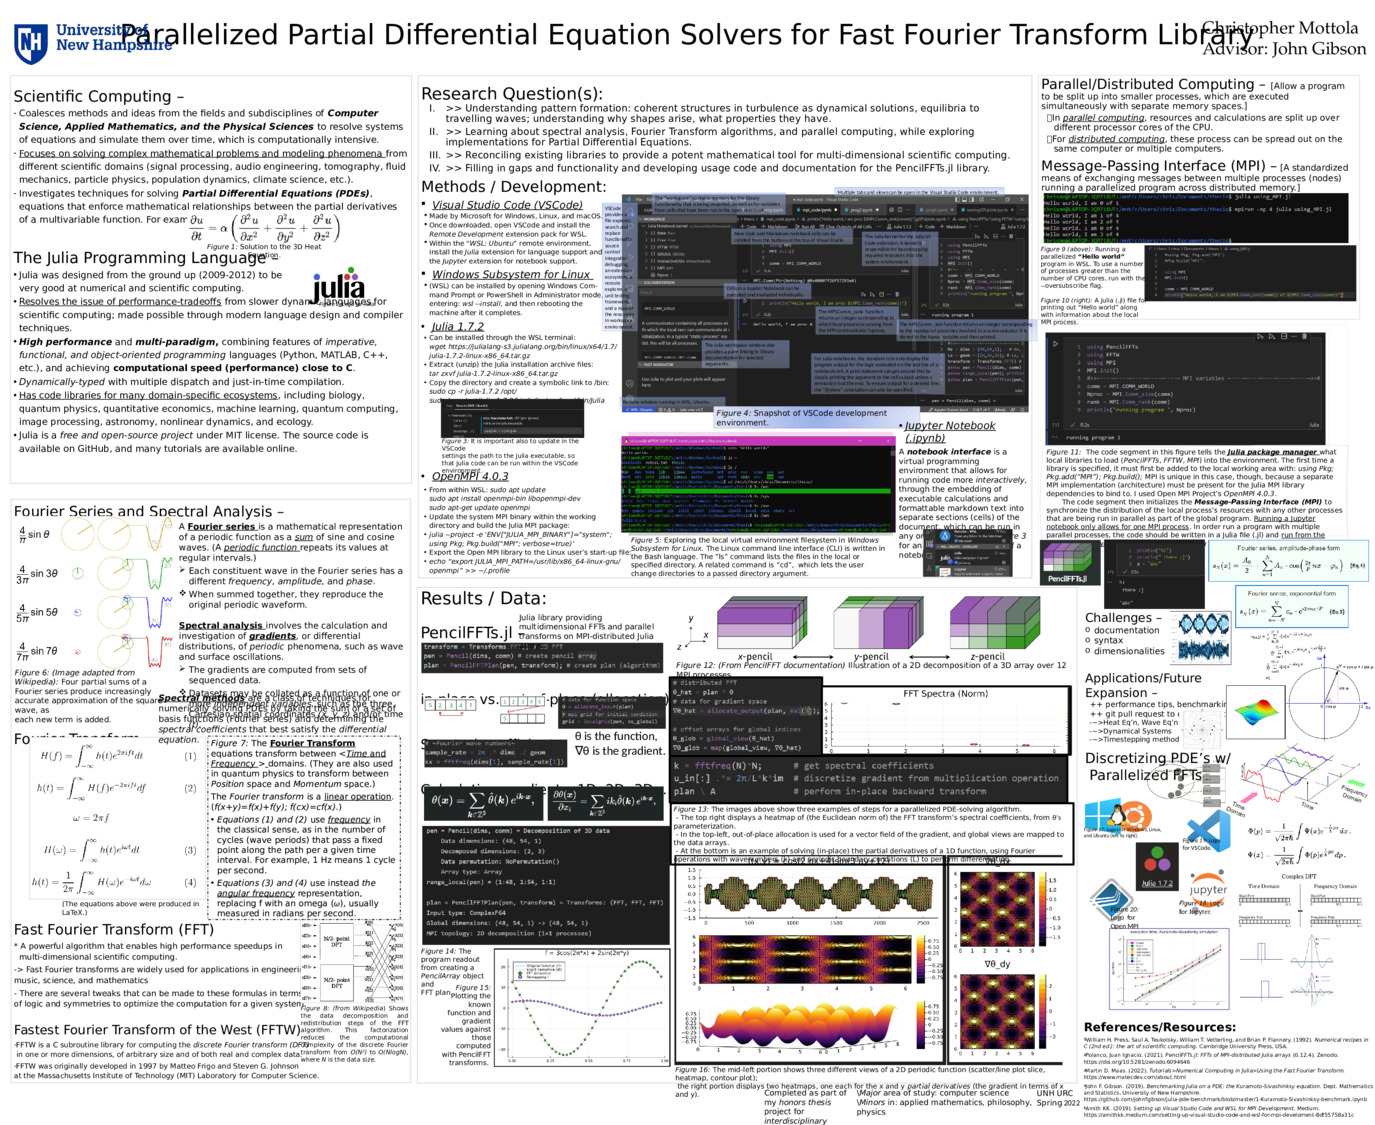 Parallelized Partial Differential Equation Solvers For Fast Fourier Transform Library by chrismo